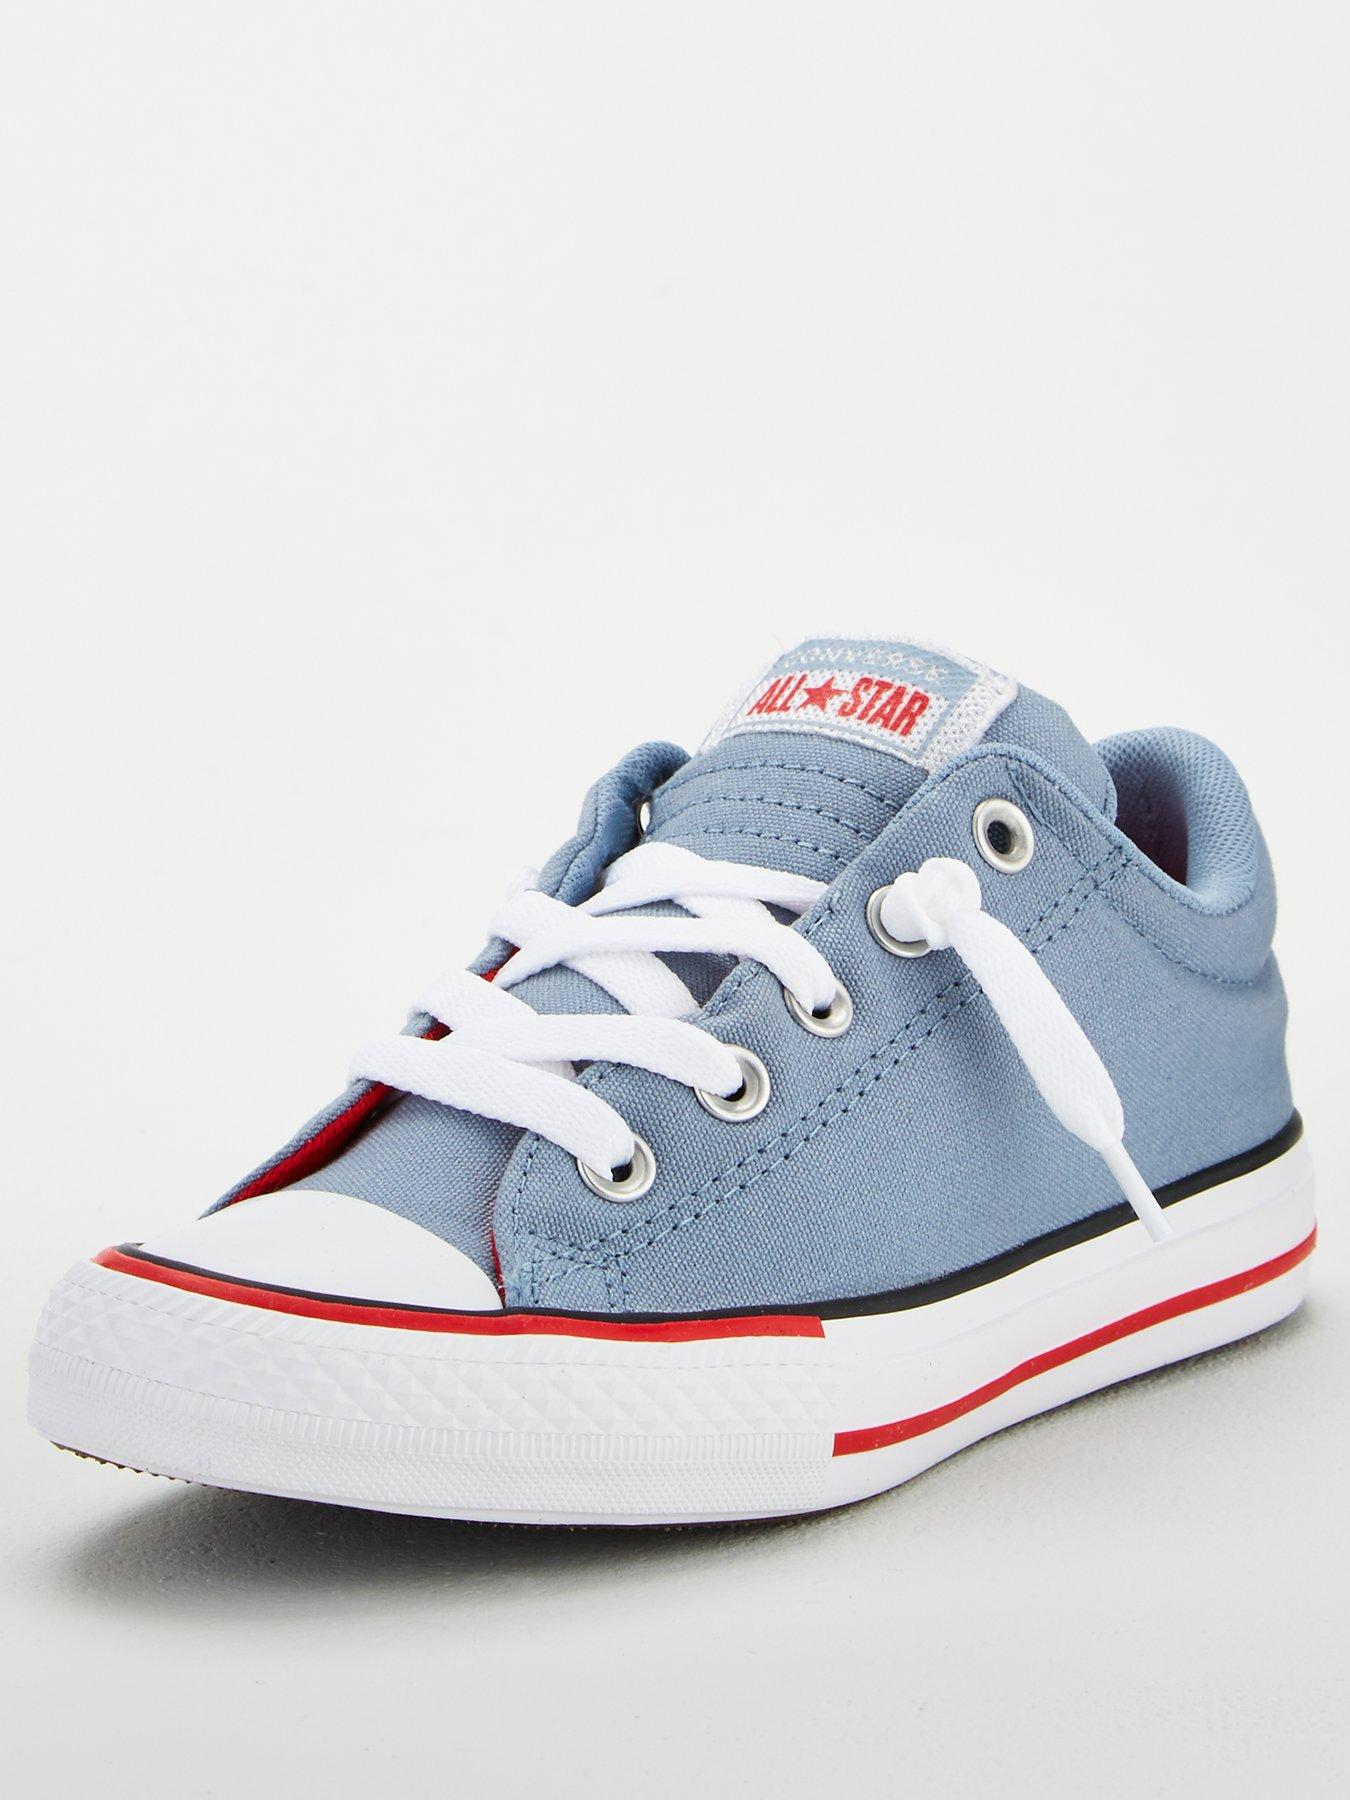 converse all star baby clothes